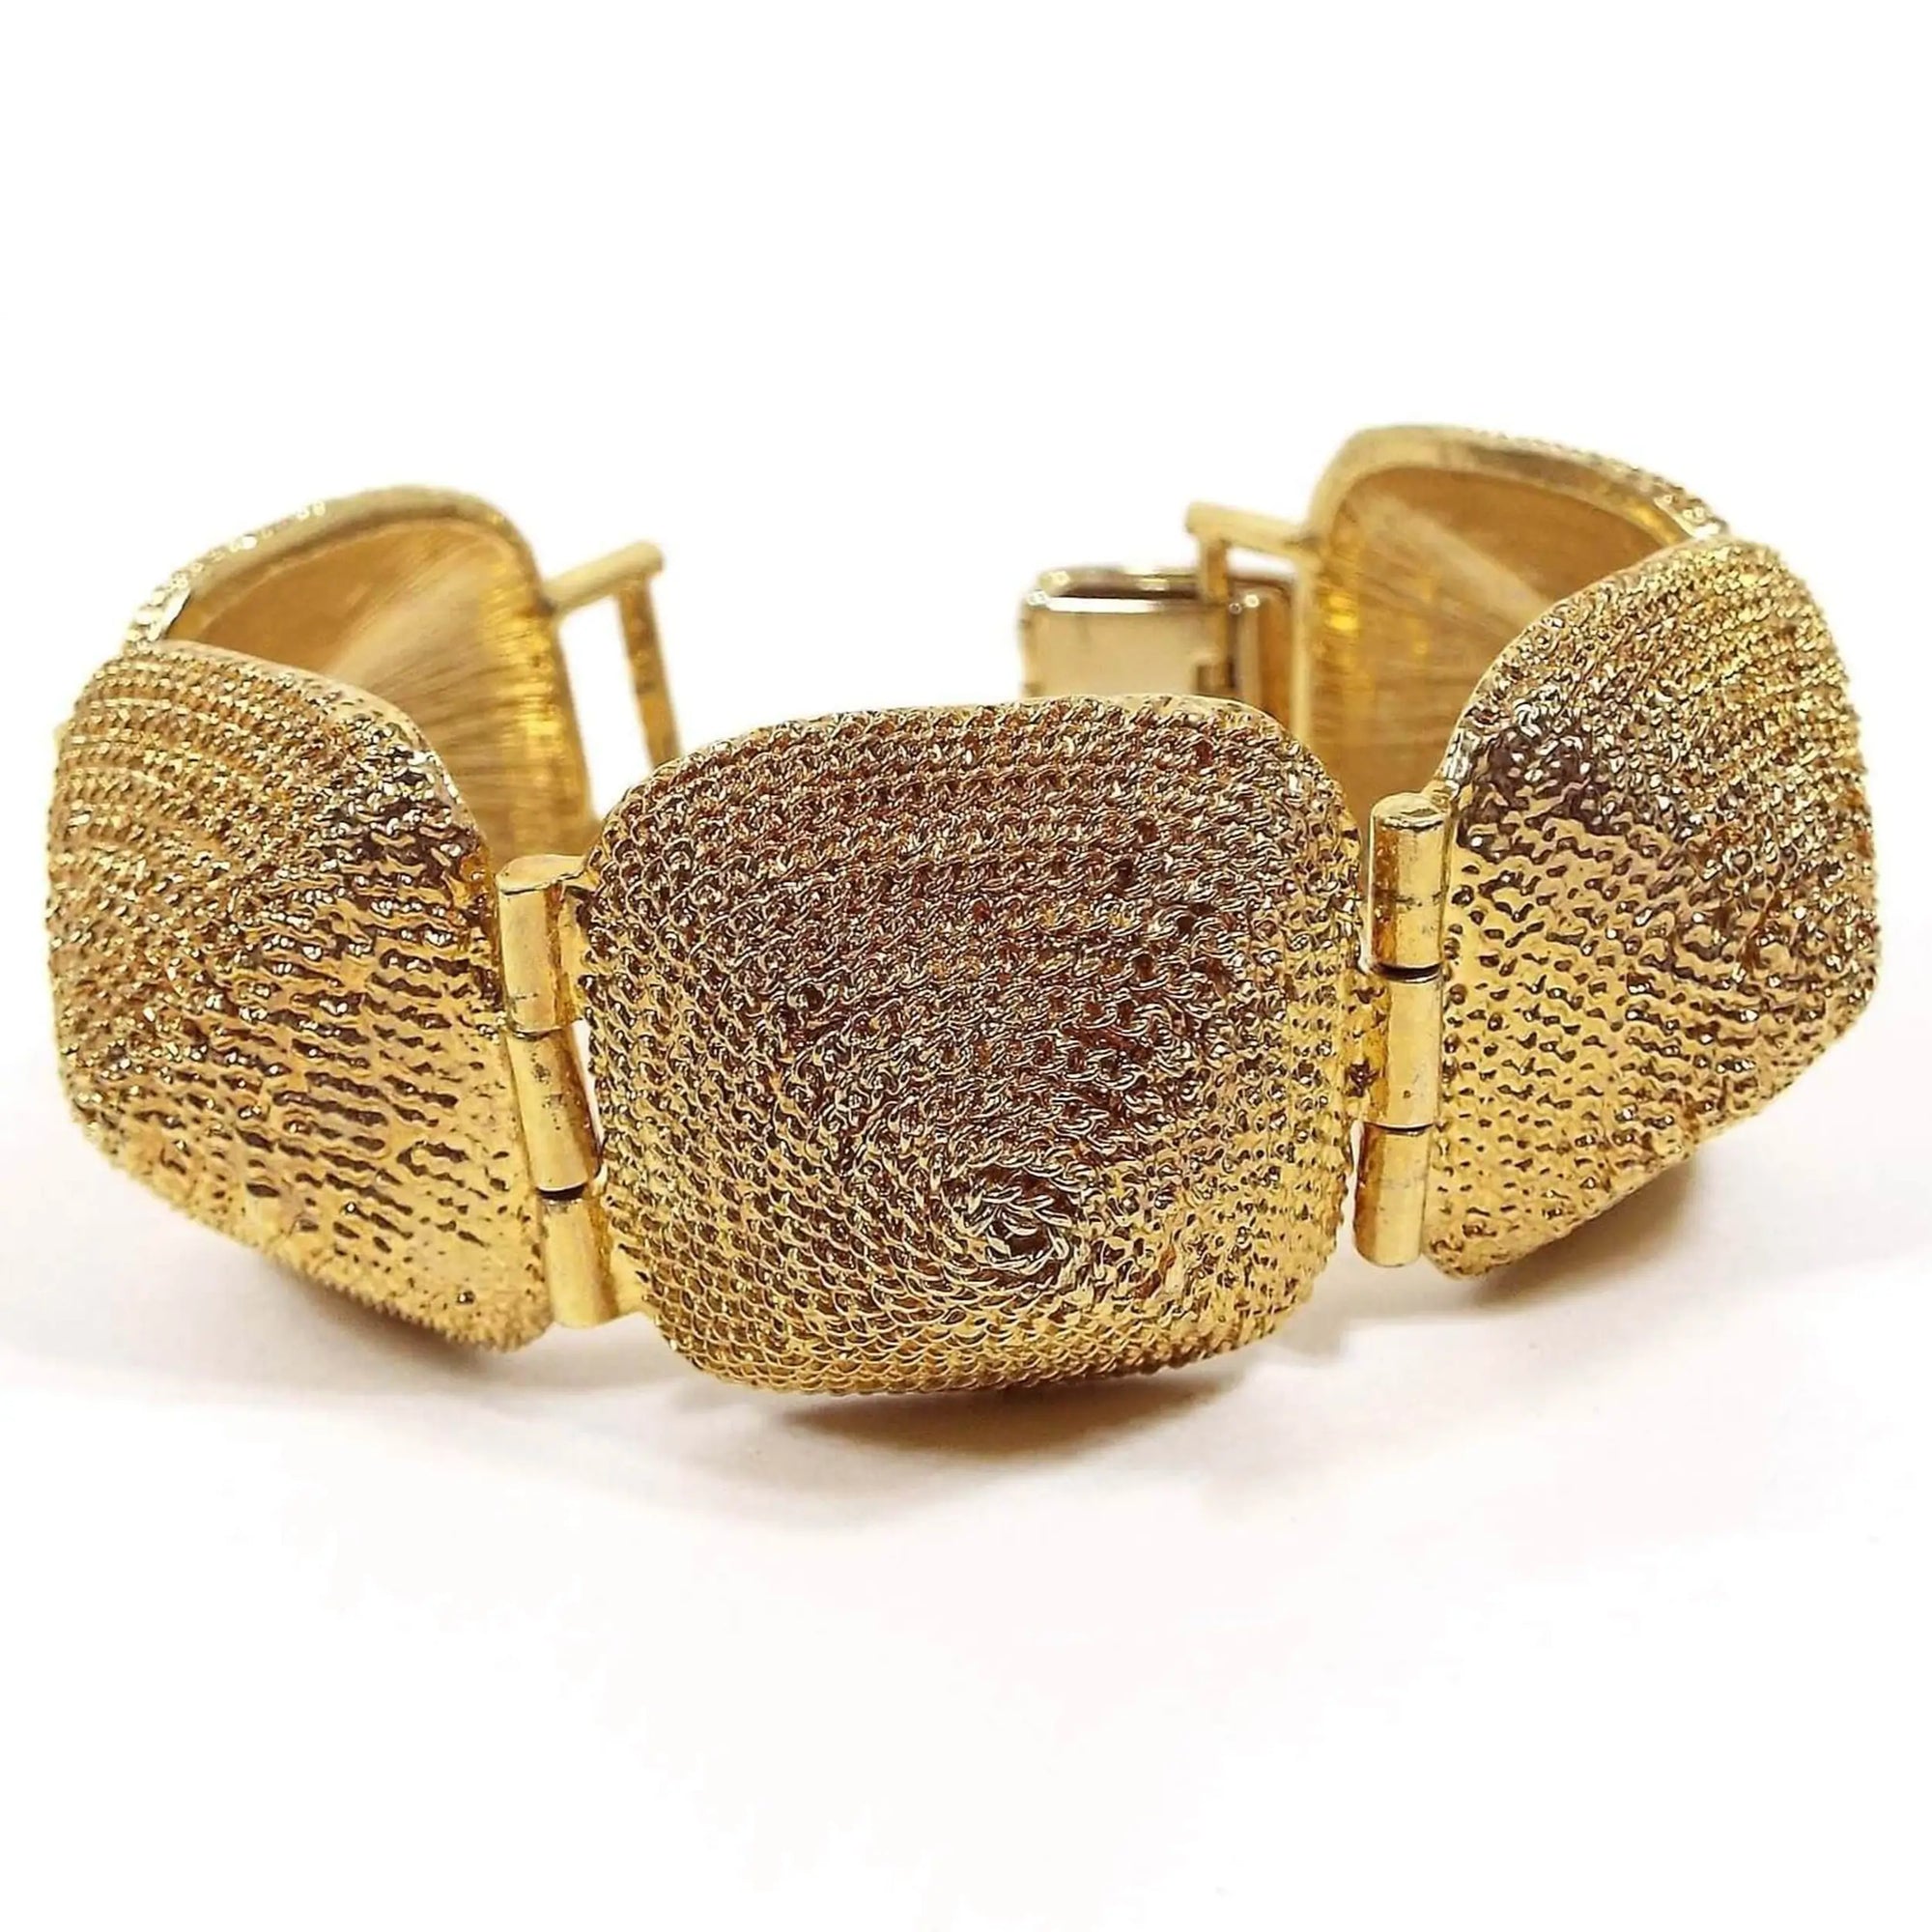 Front view of the retro vintage wide link bracelet. There are five large links that are rounded square in shape and domed. Each one has a textured spiral design on it. It is gold tone in color and there is a snap lock clasp on the end.